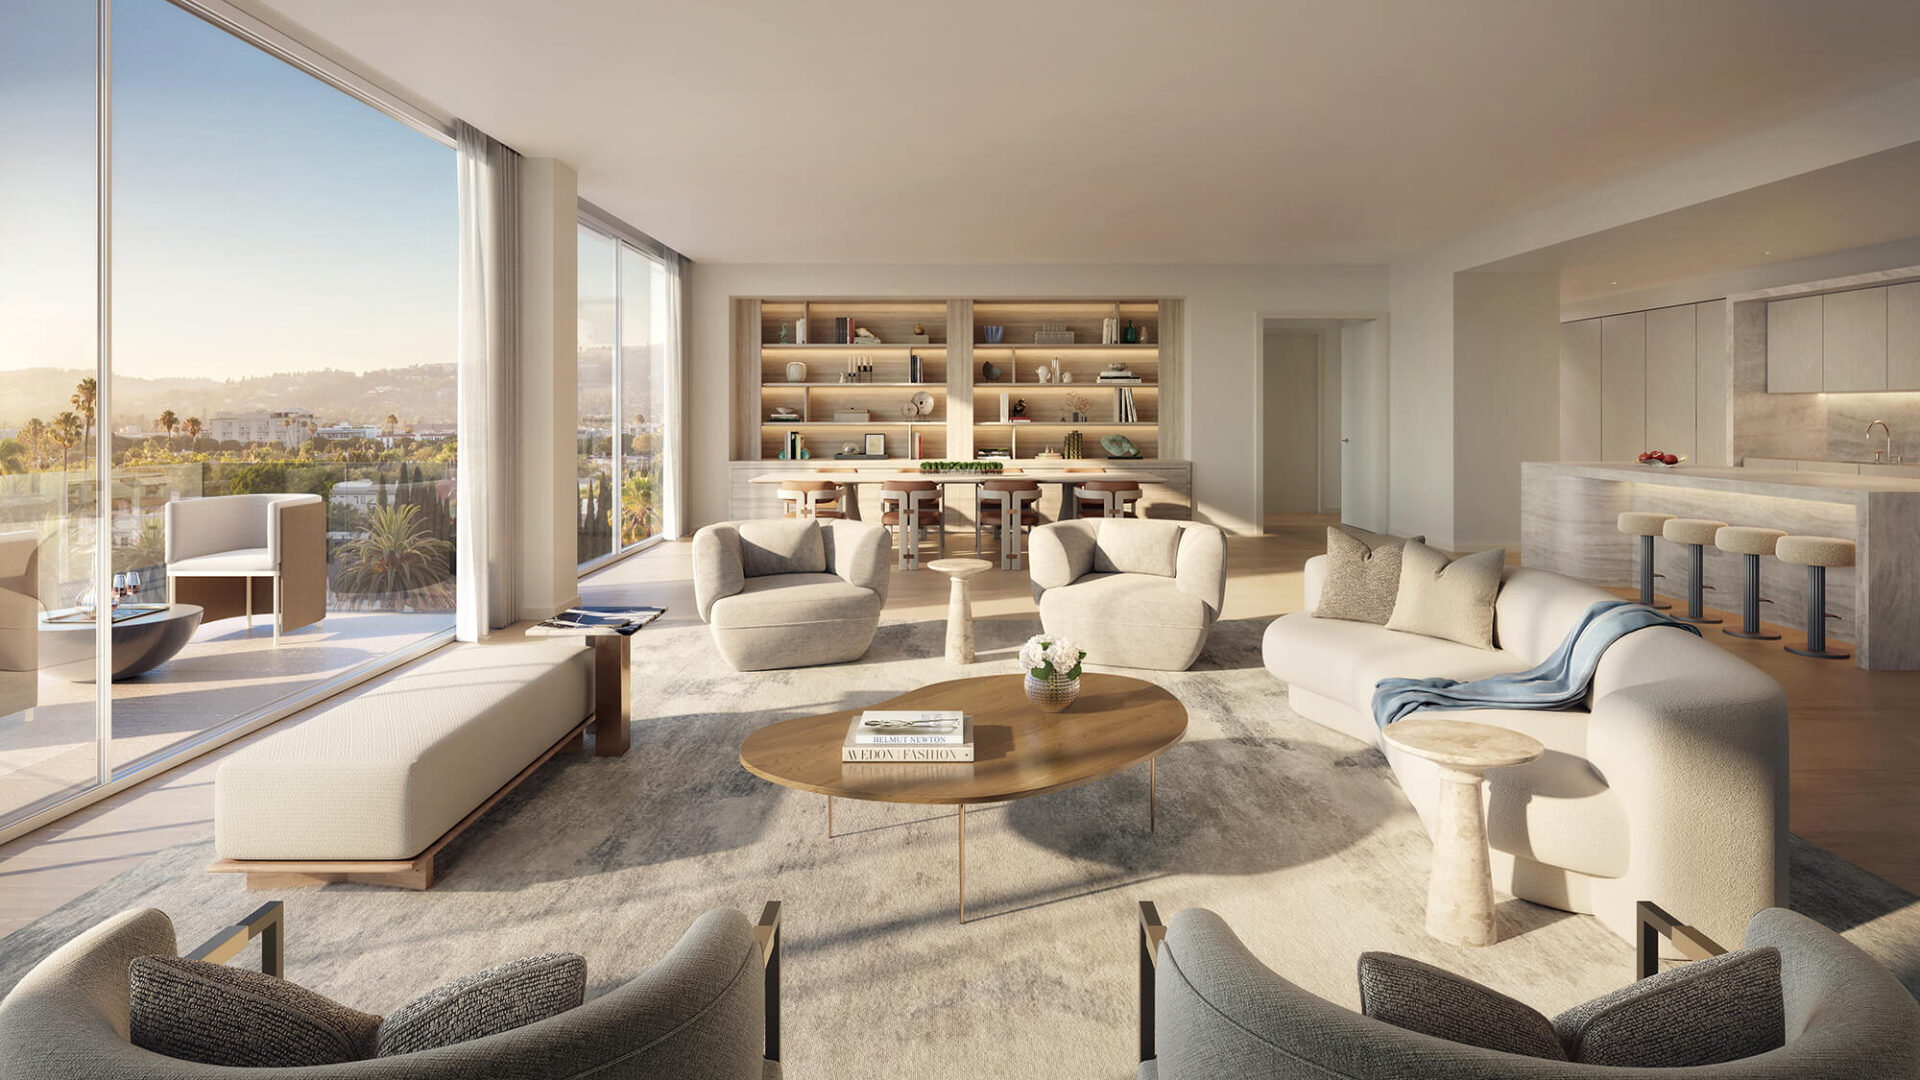 a mandarin oriental beverly hills rendering of an open plan living kitchen and dining space. floor to ceiling windows look out over a balcony and has a view of beverly hills